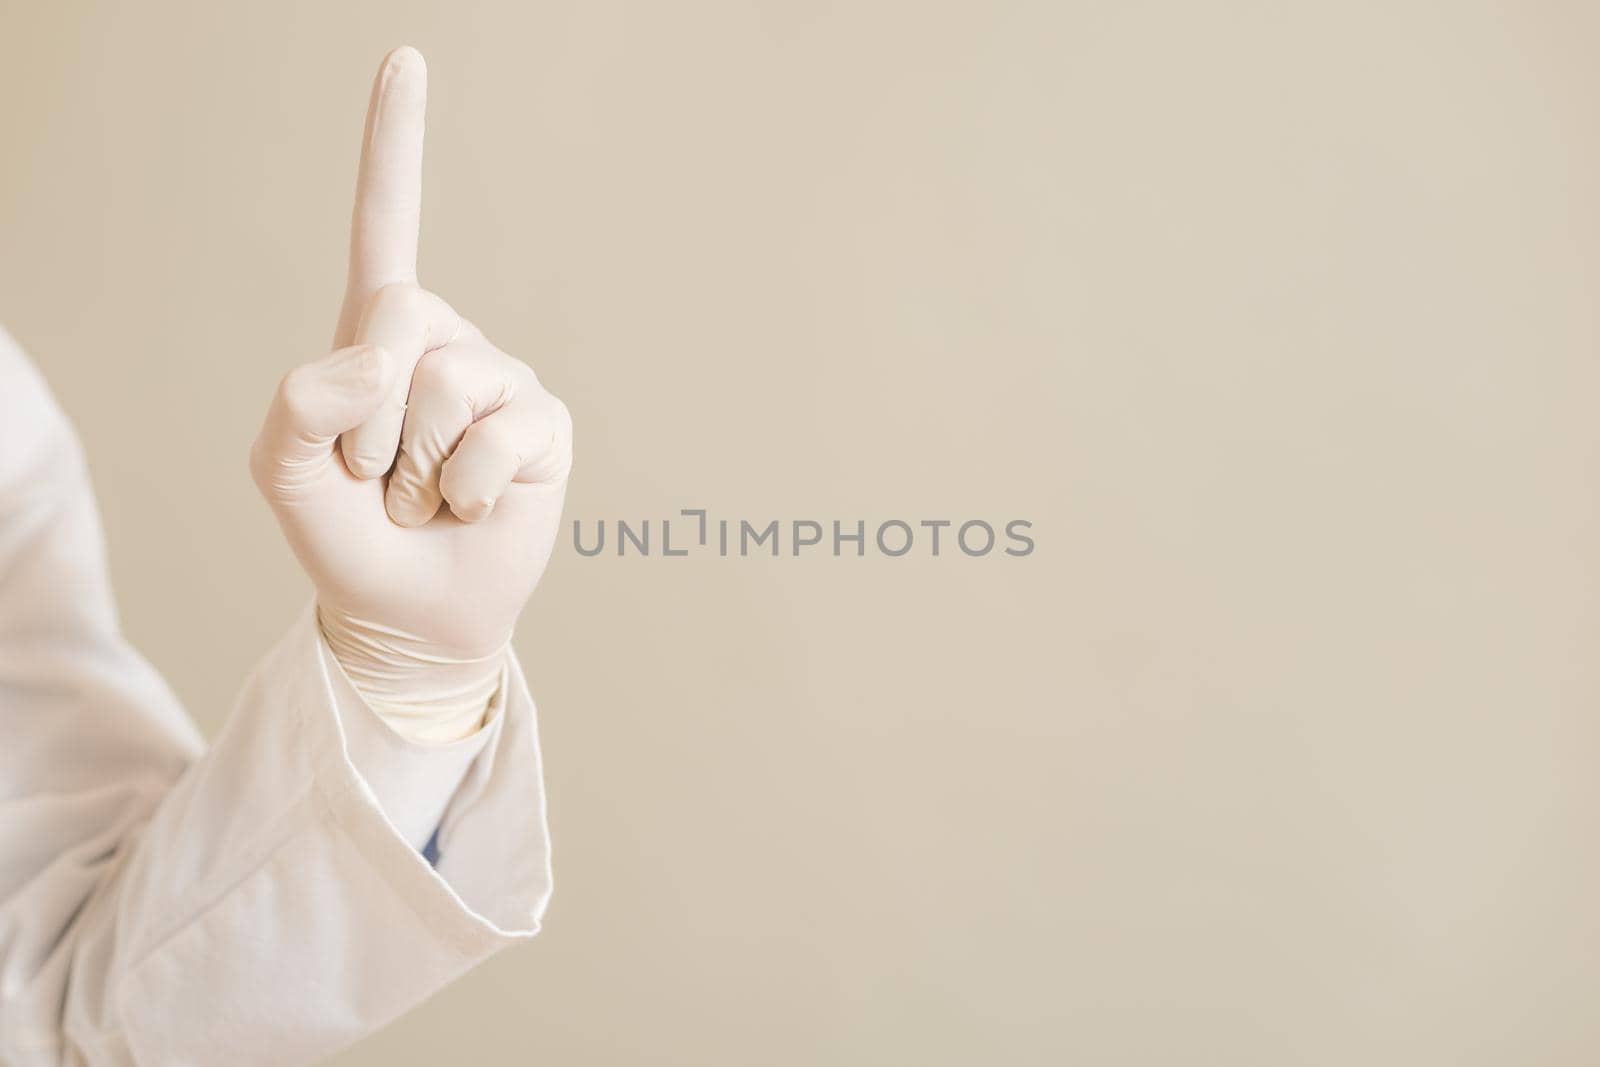 Image of close up hand in protective glove  of doctor pointing.